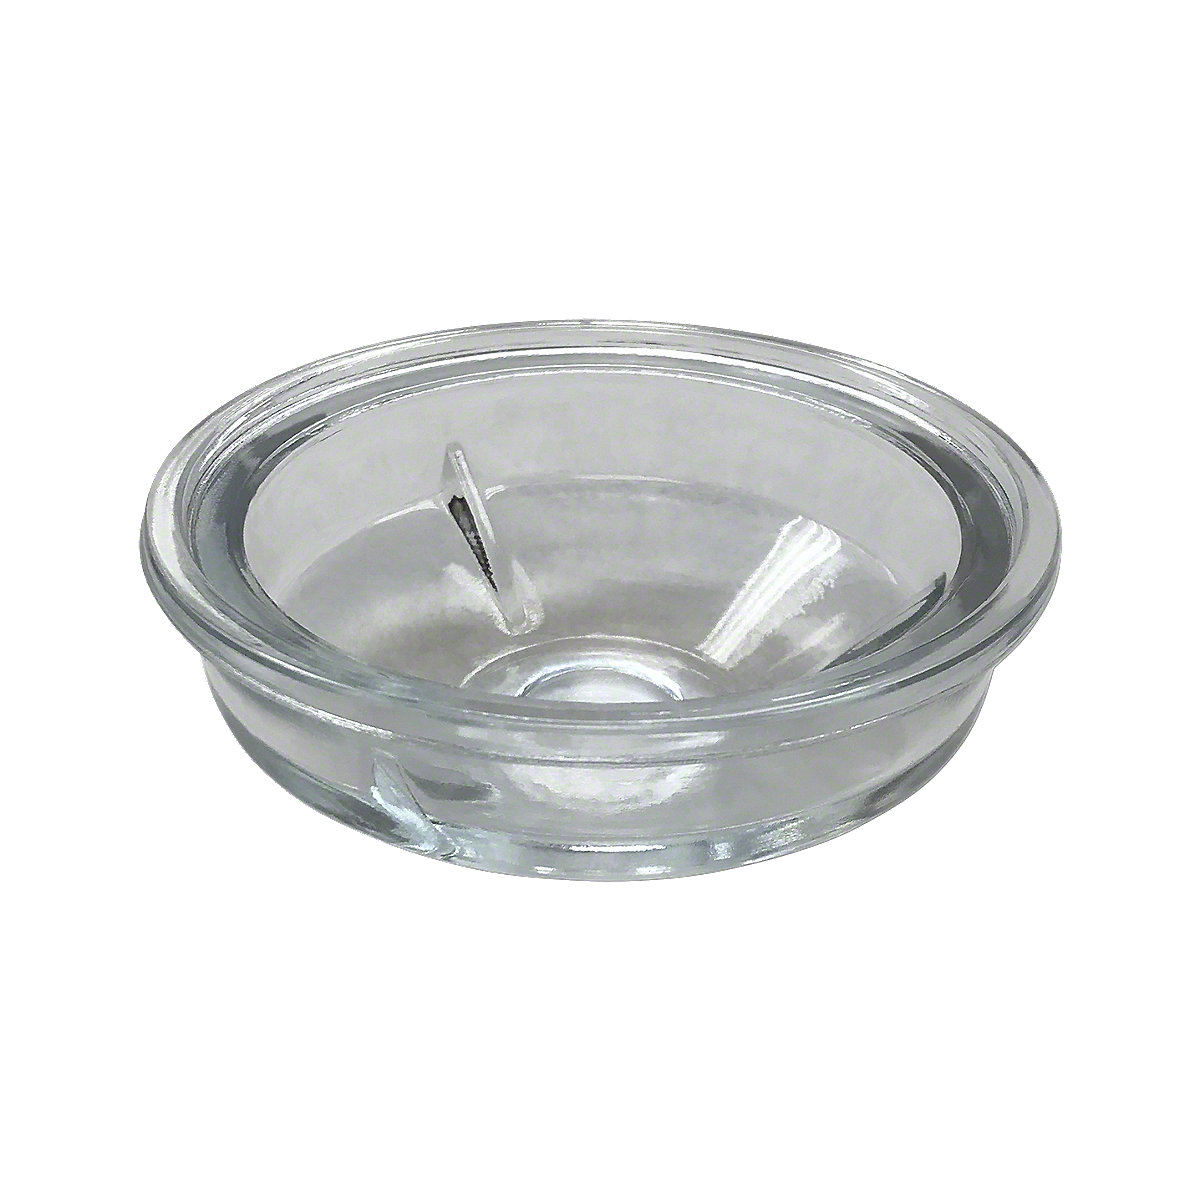 Fuel Filter Glass Bowl